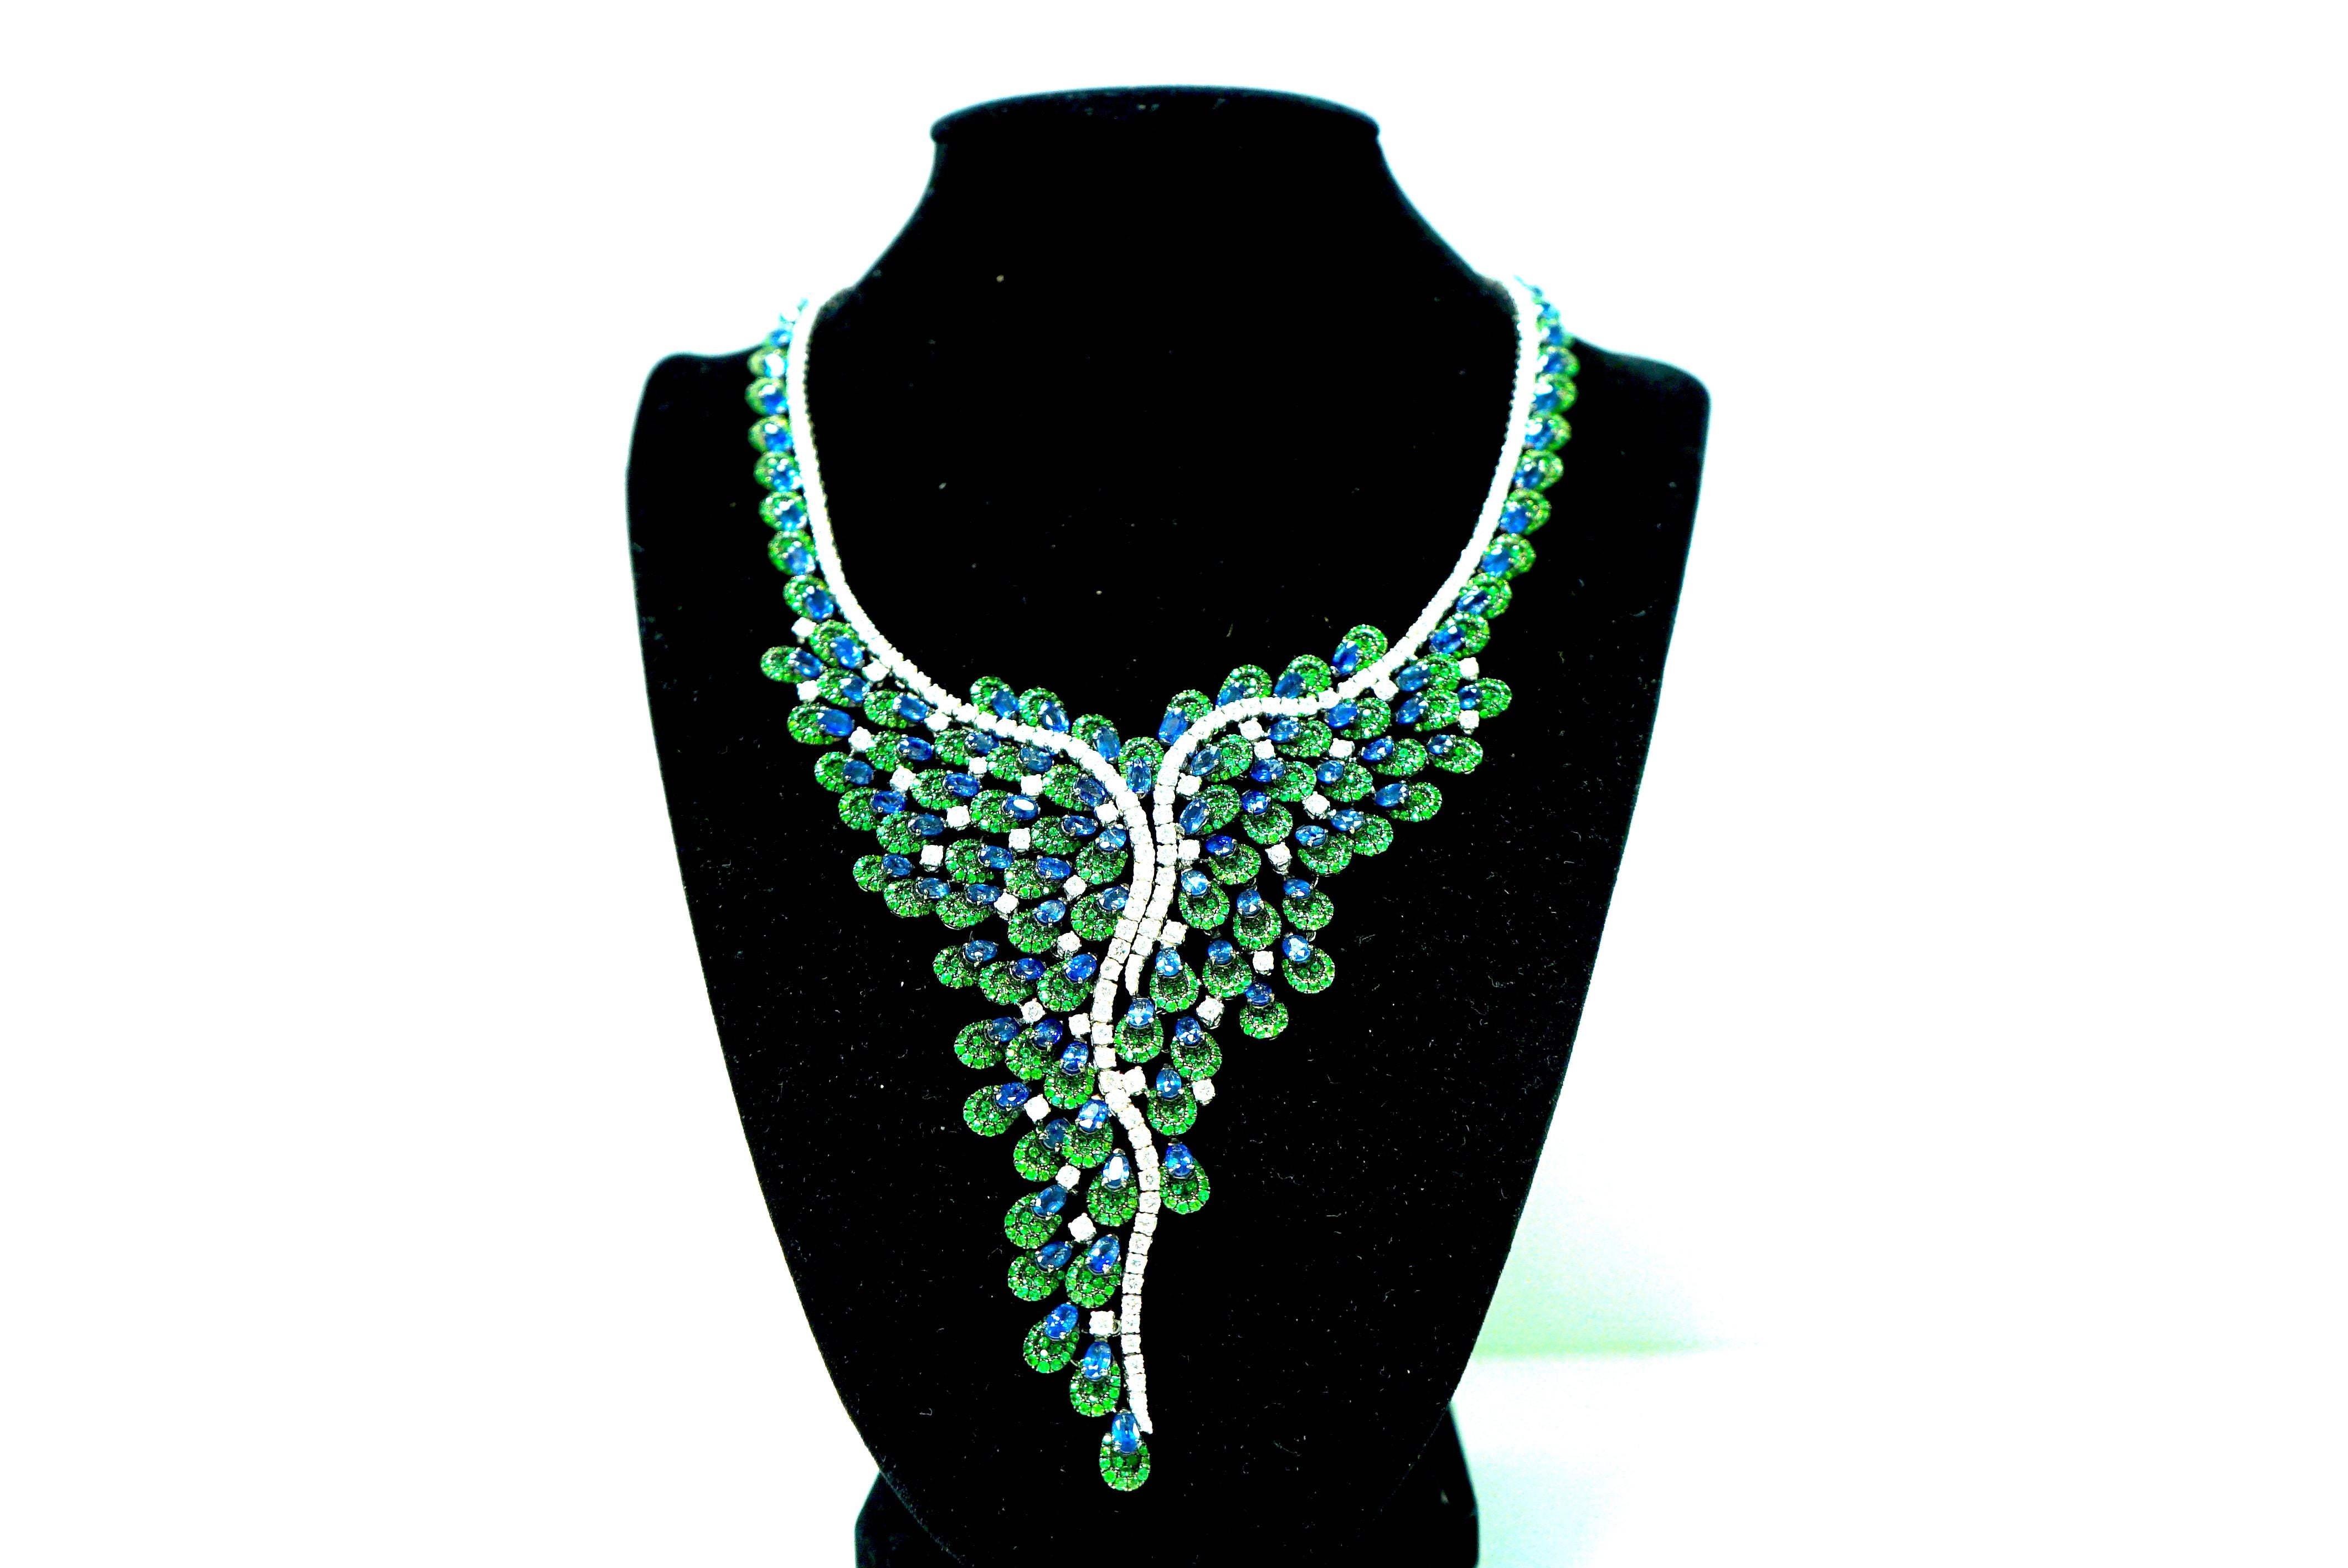 Round Cut One of a Kind Yvel Sapphire Tsavorite Diamond Necklace from the Peacock Coll